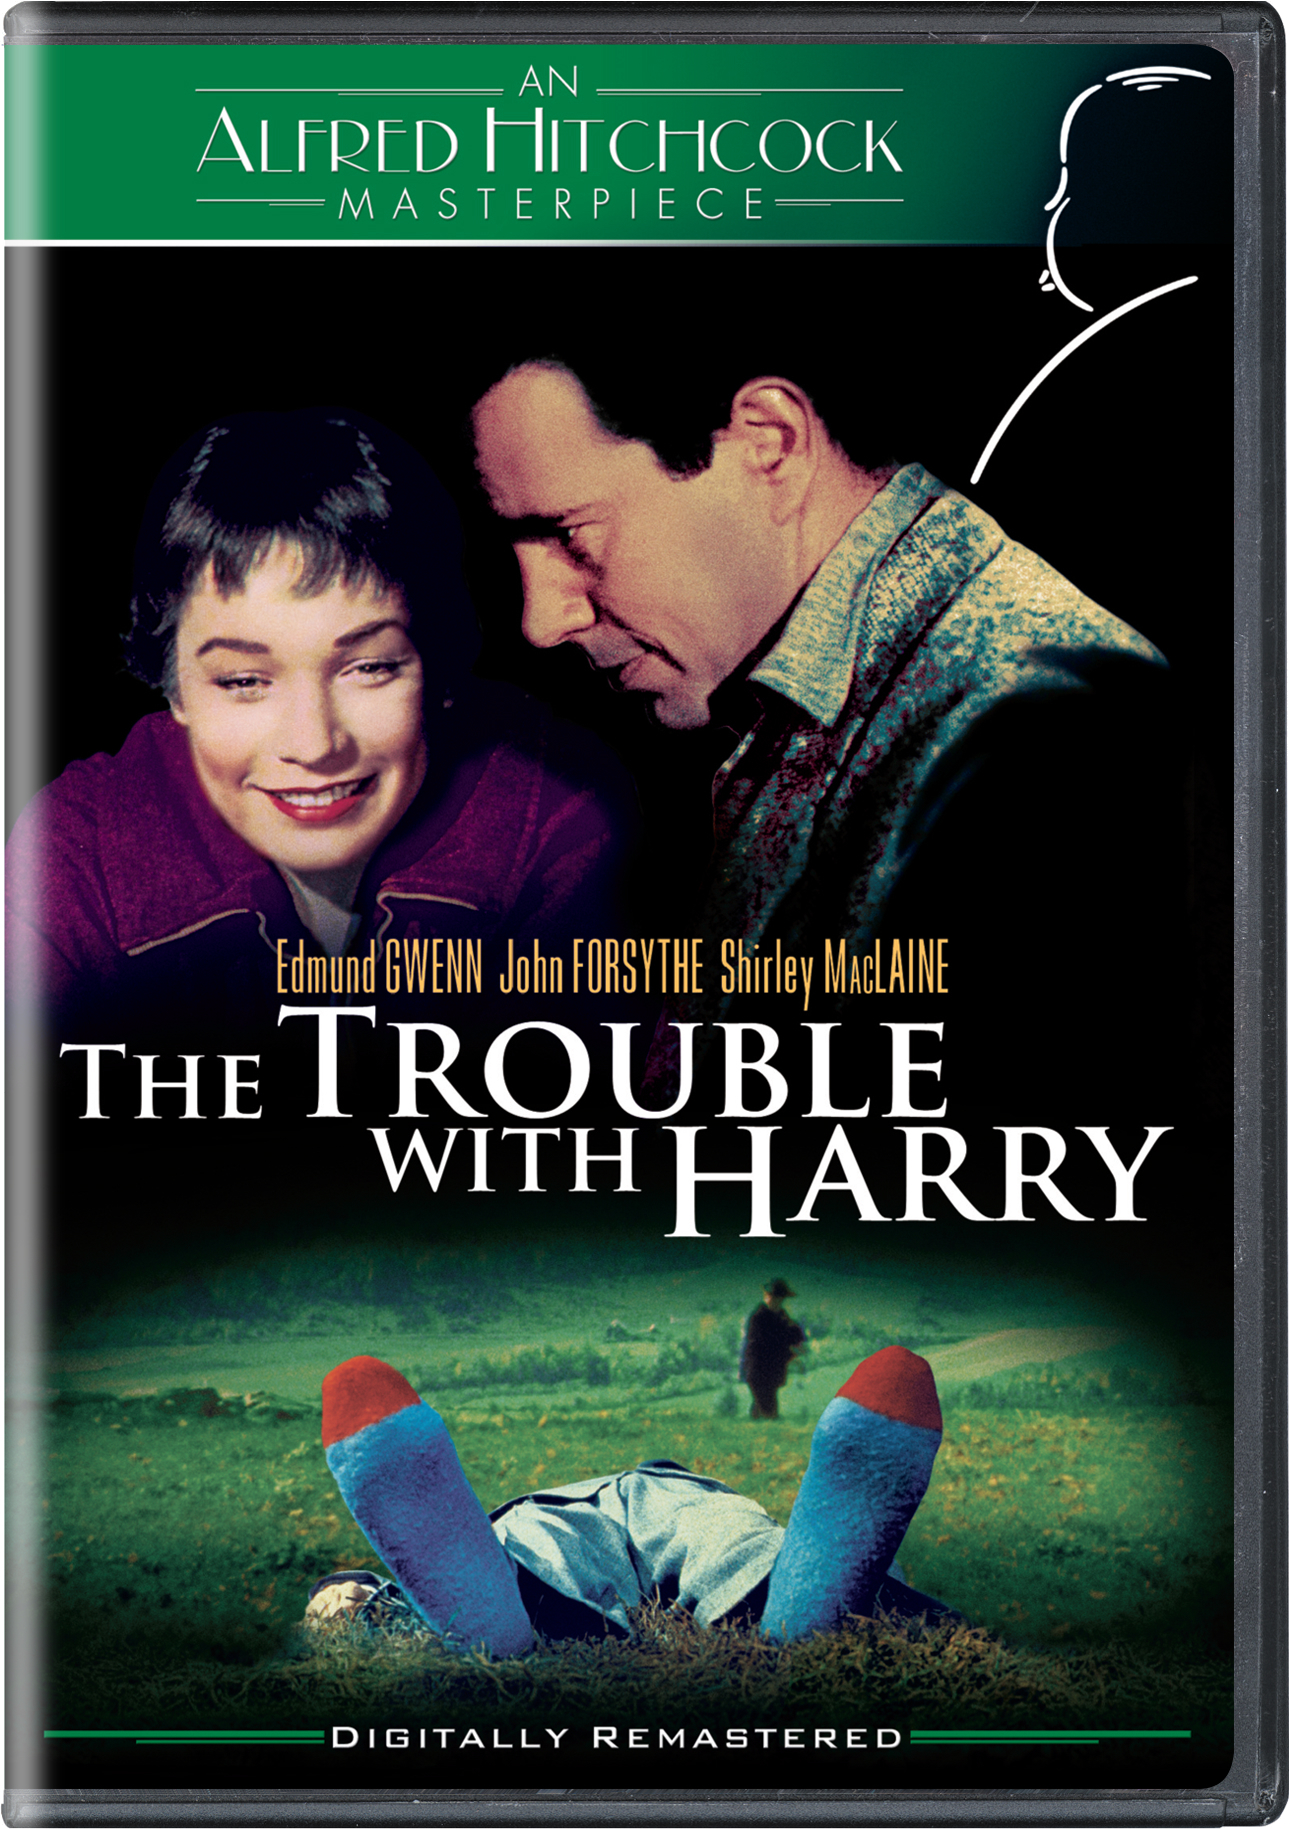 The Trouble With Harry - DVD [ 1955 ]  - Modern Classic Movies On DVD - Movies On GRUV